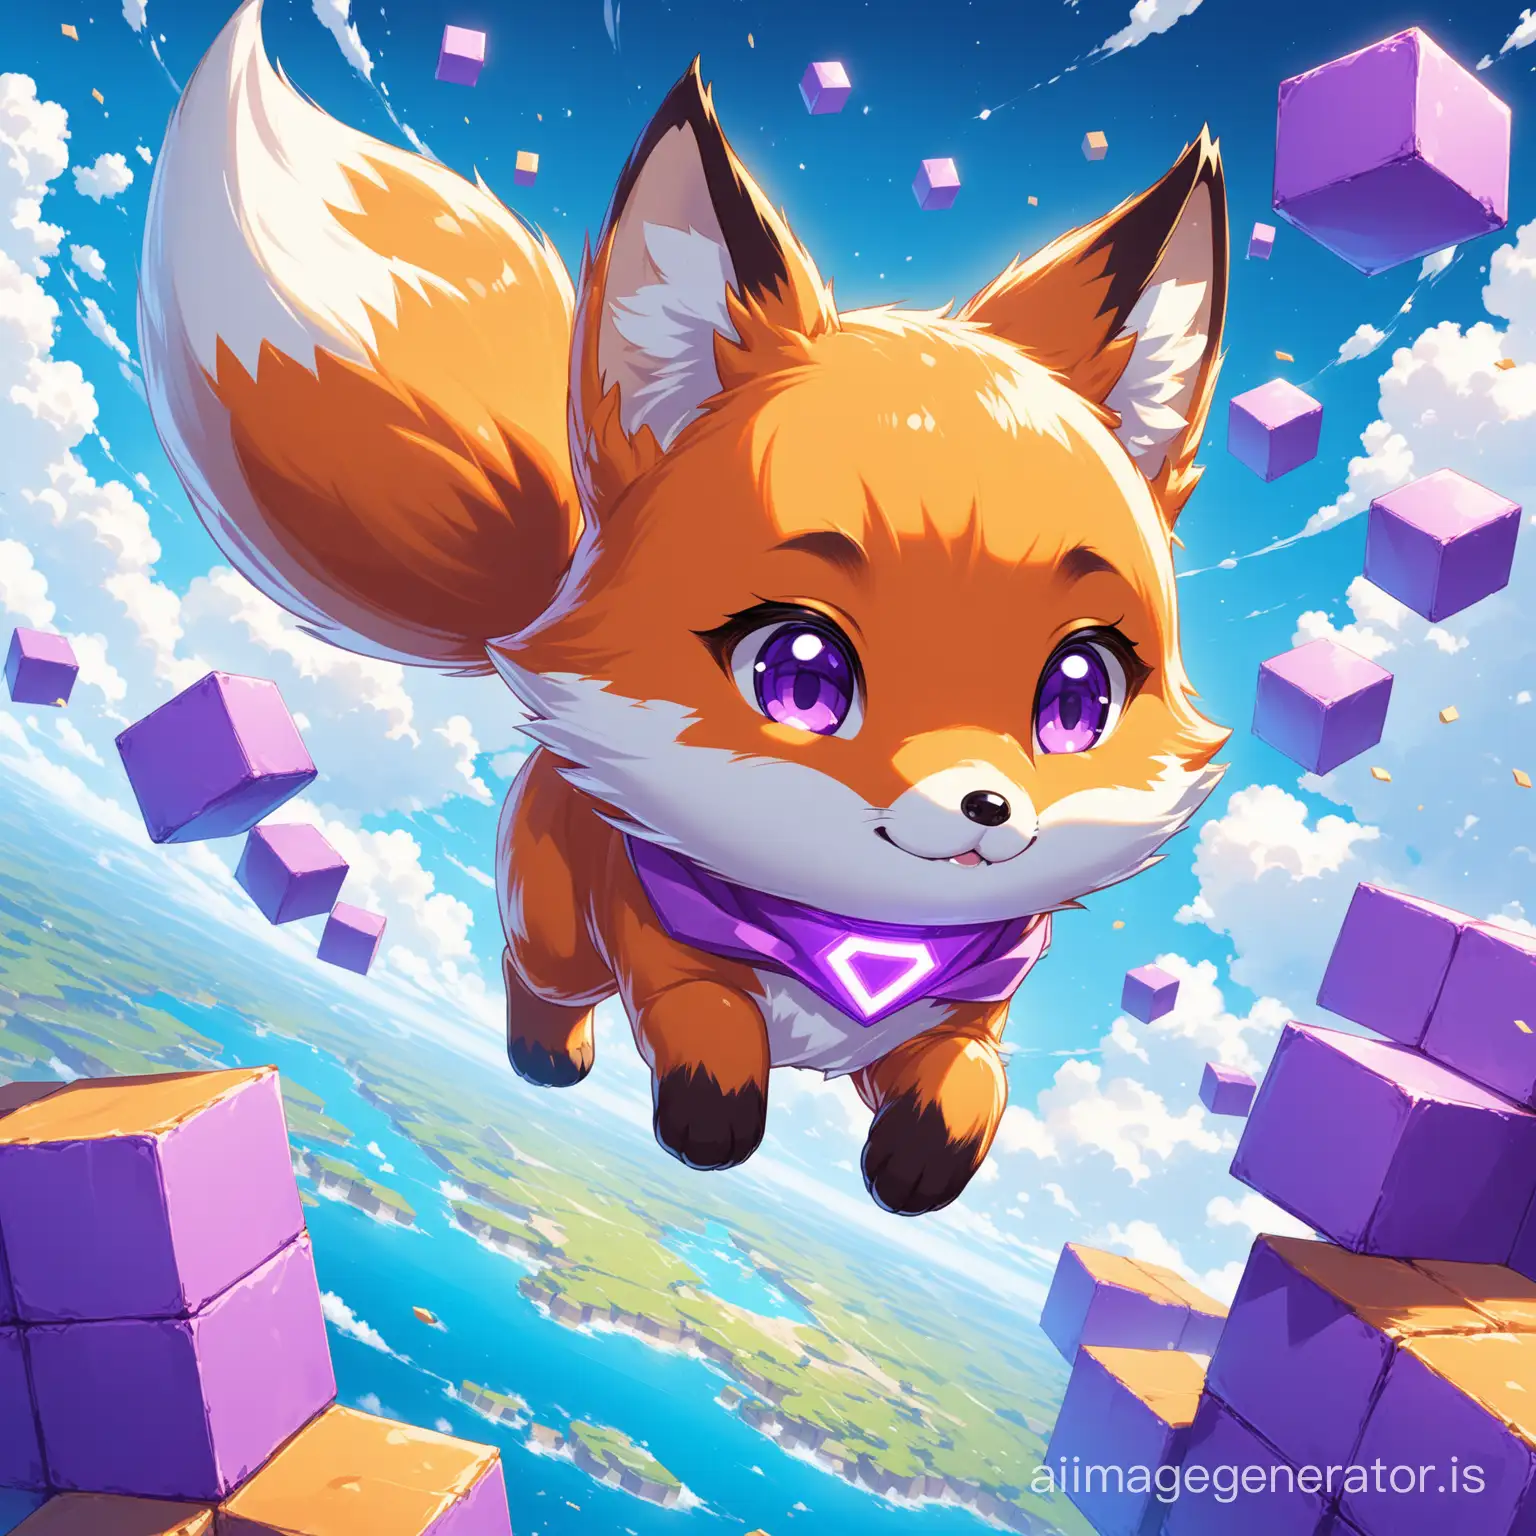 A little cute fox  flying on the earth with super detail and High Quality
Purple and floating blocks are seen everywhere
Details are evident beautifully and with great precision
